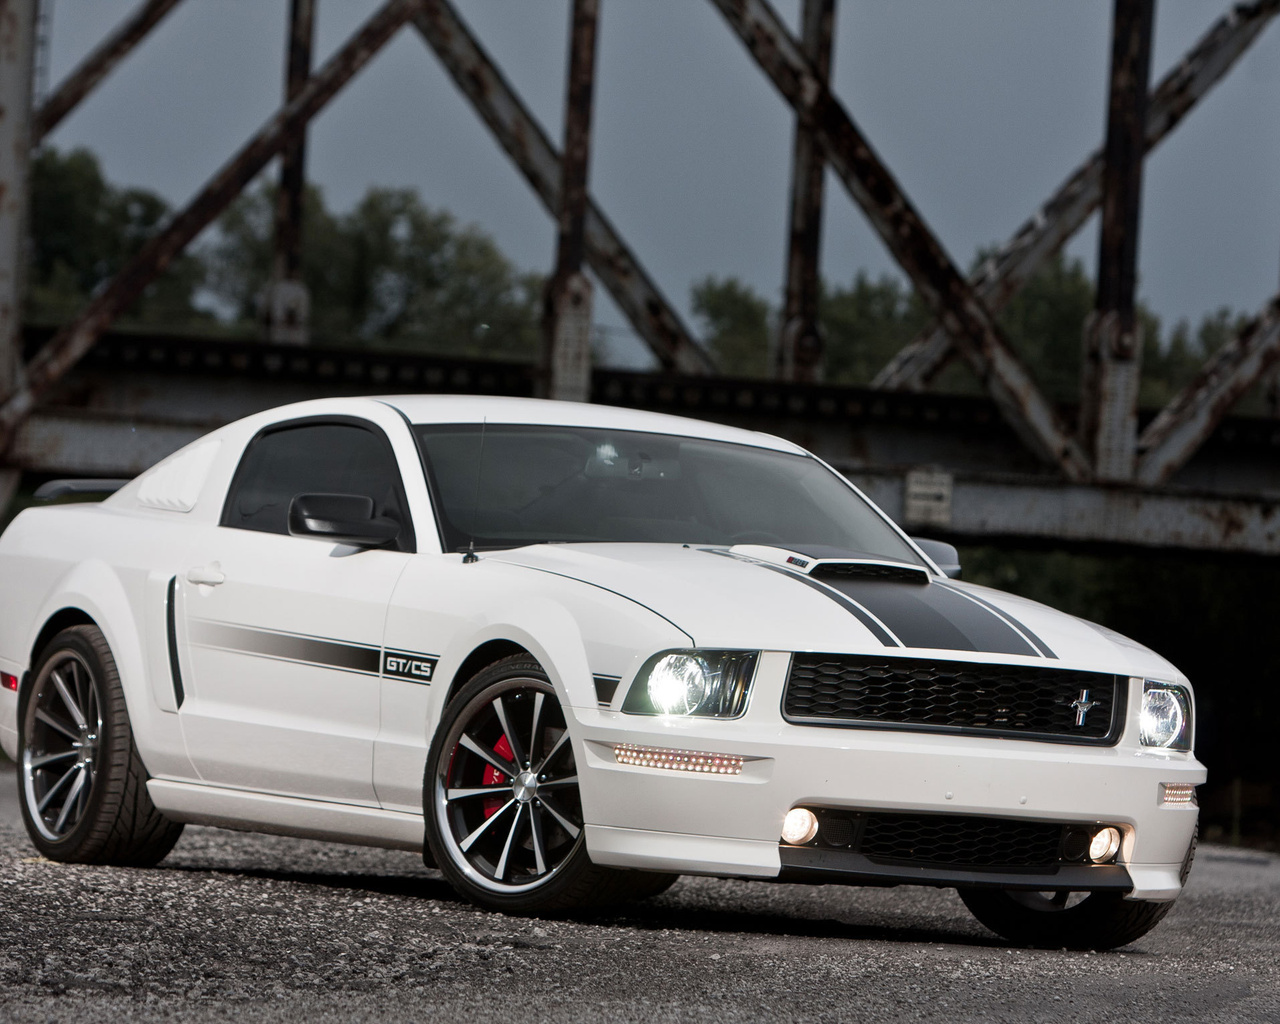 , white, , gtcs, Ford, , , mustang,  